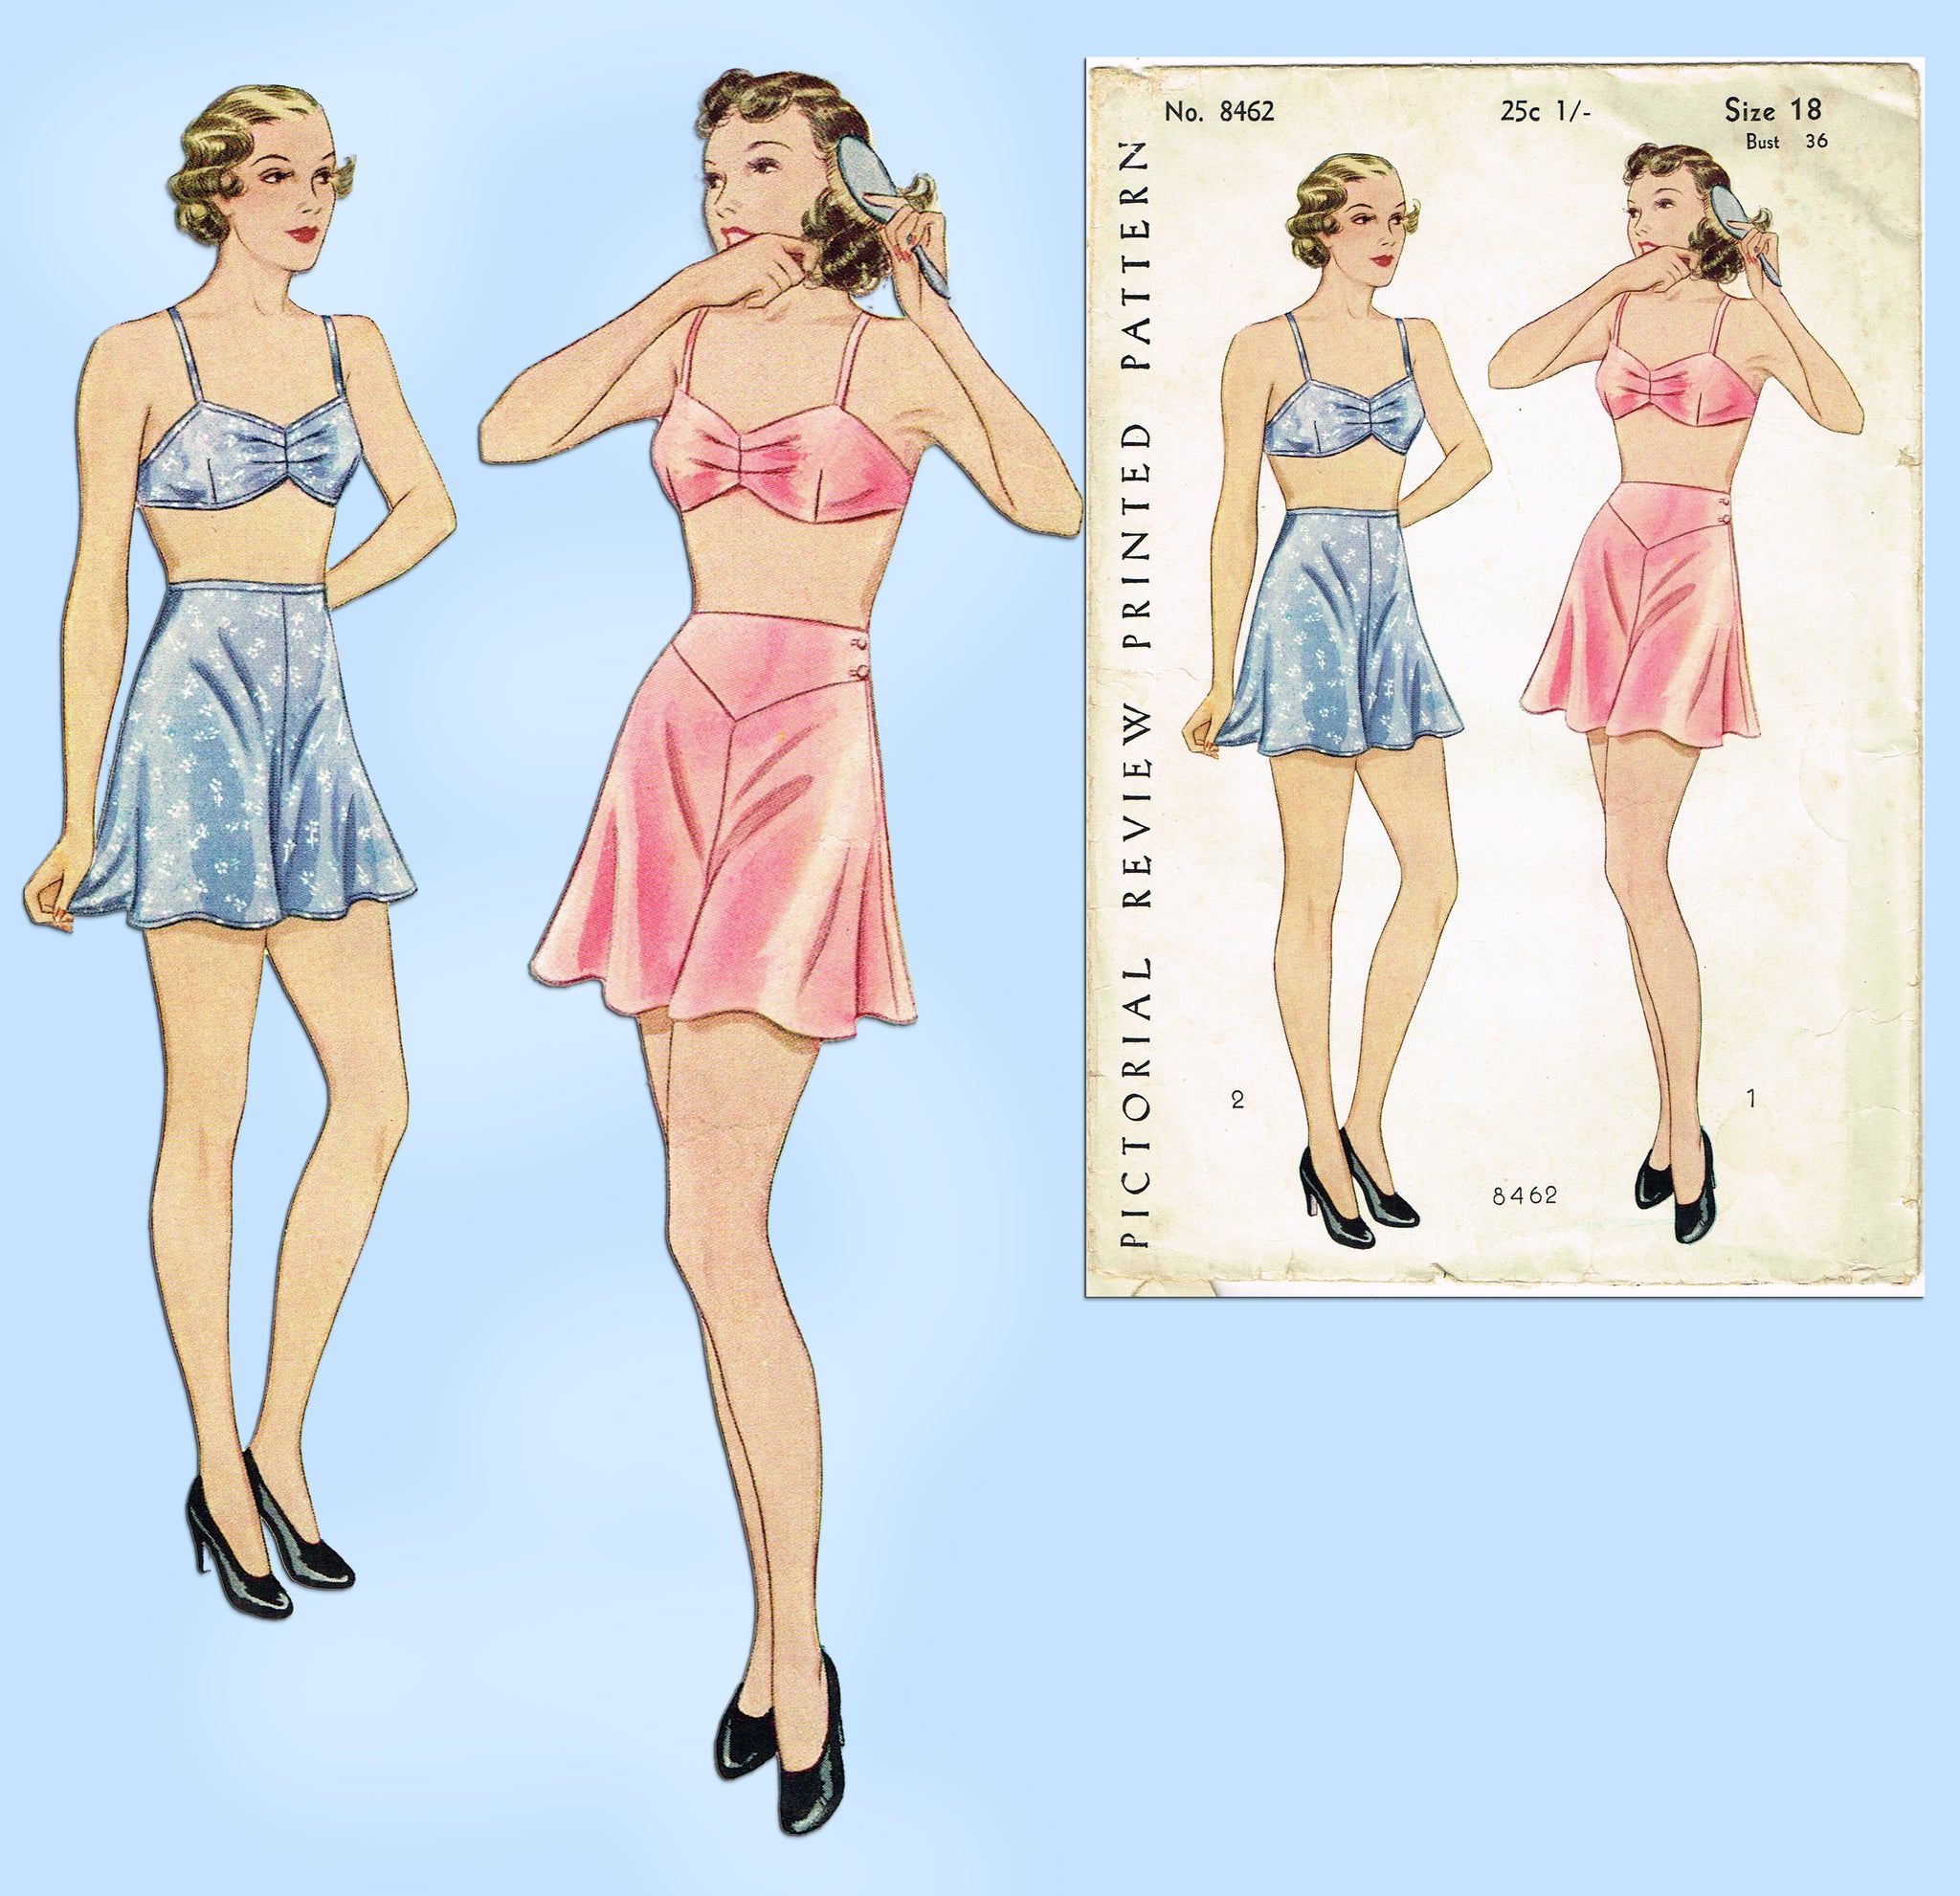 1950s Bra in 2 Sizes Bust 36 and 38 Ins. Paper Sewing Pattern